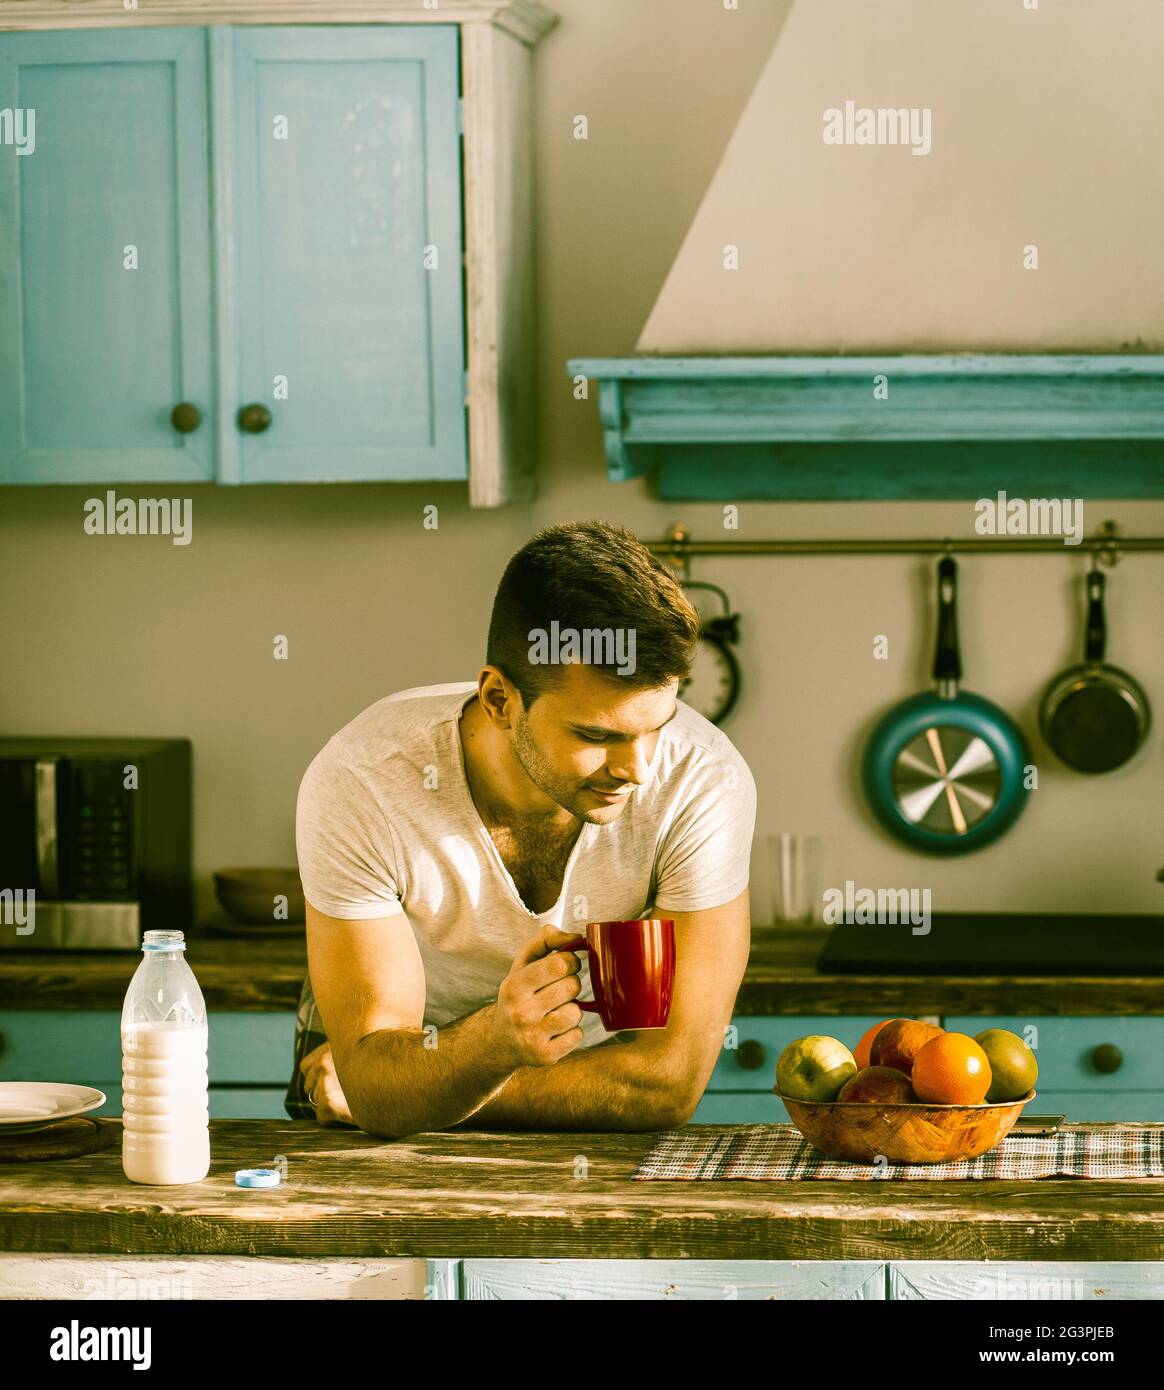 Smiling Young Man Drinking Morning Coffee With Milk Stock Photo